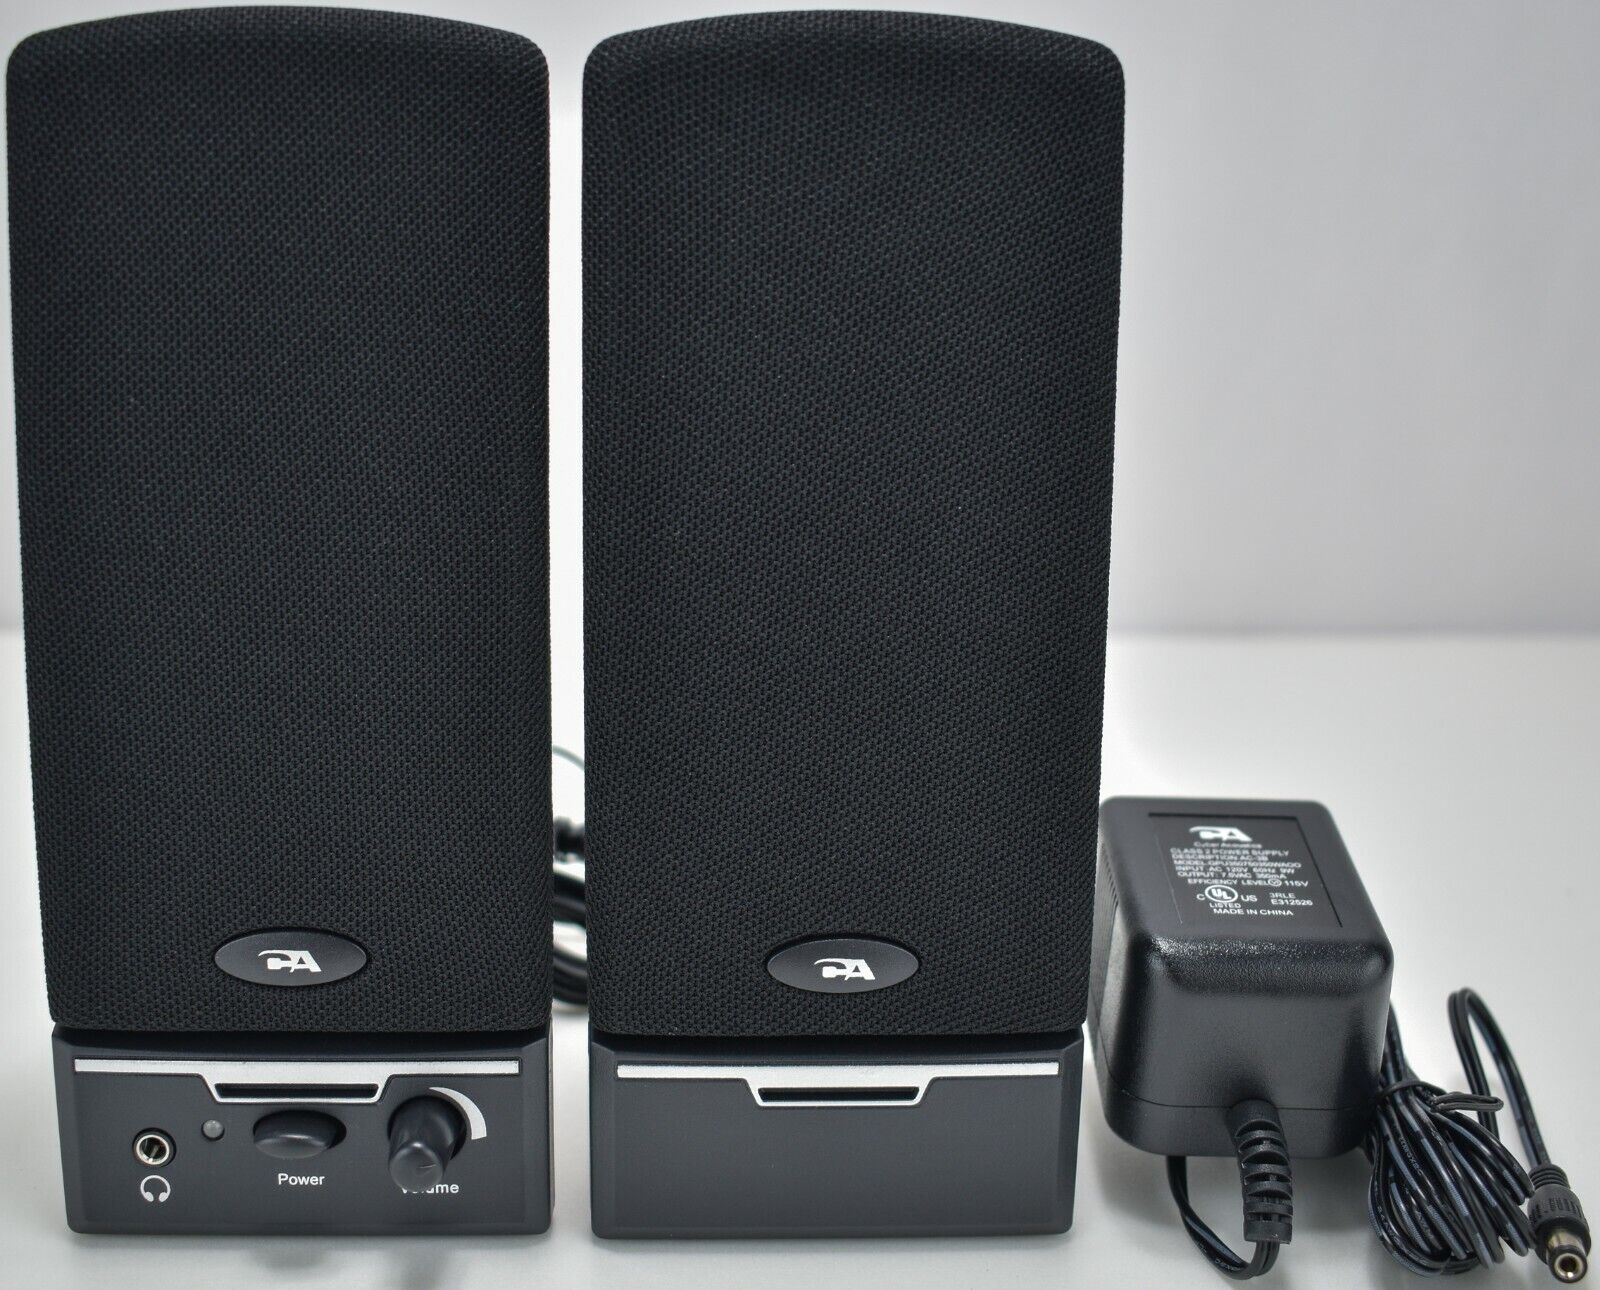 New Cyber Acoustics CA-2014 Powered Speaker System